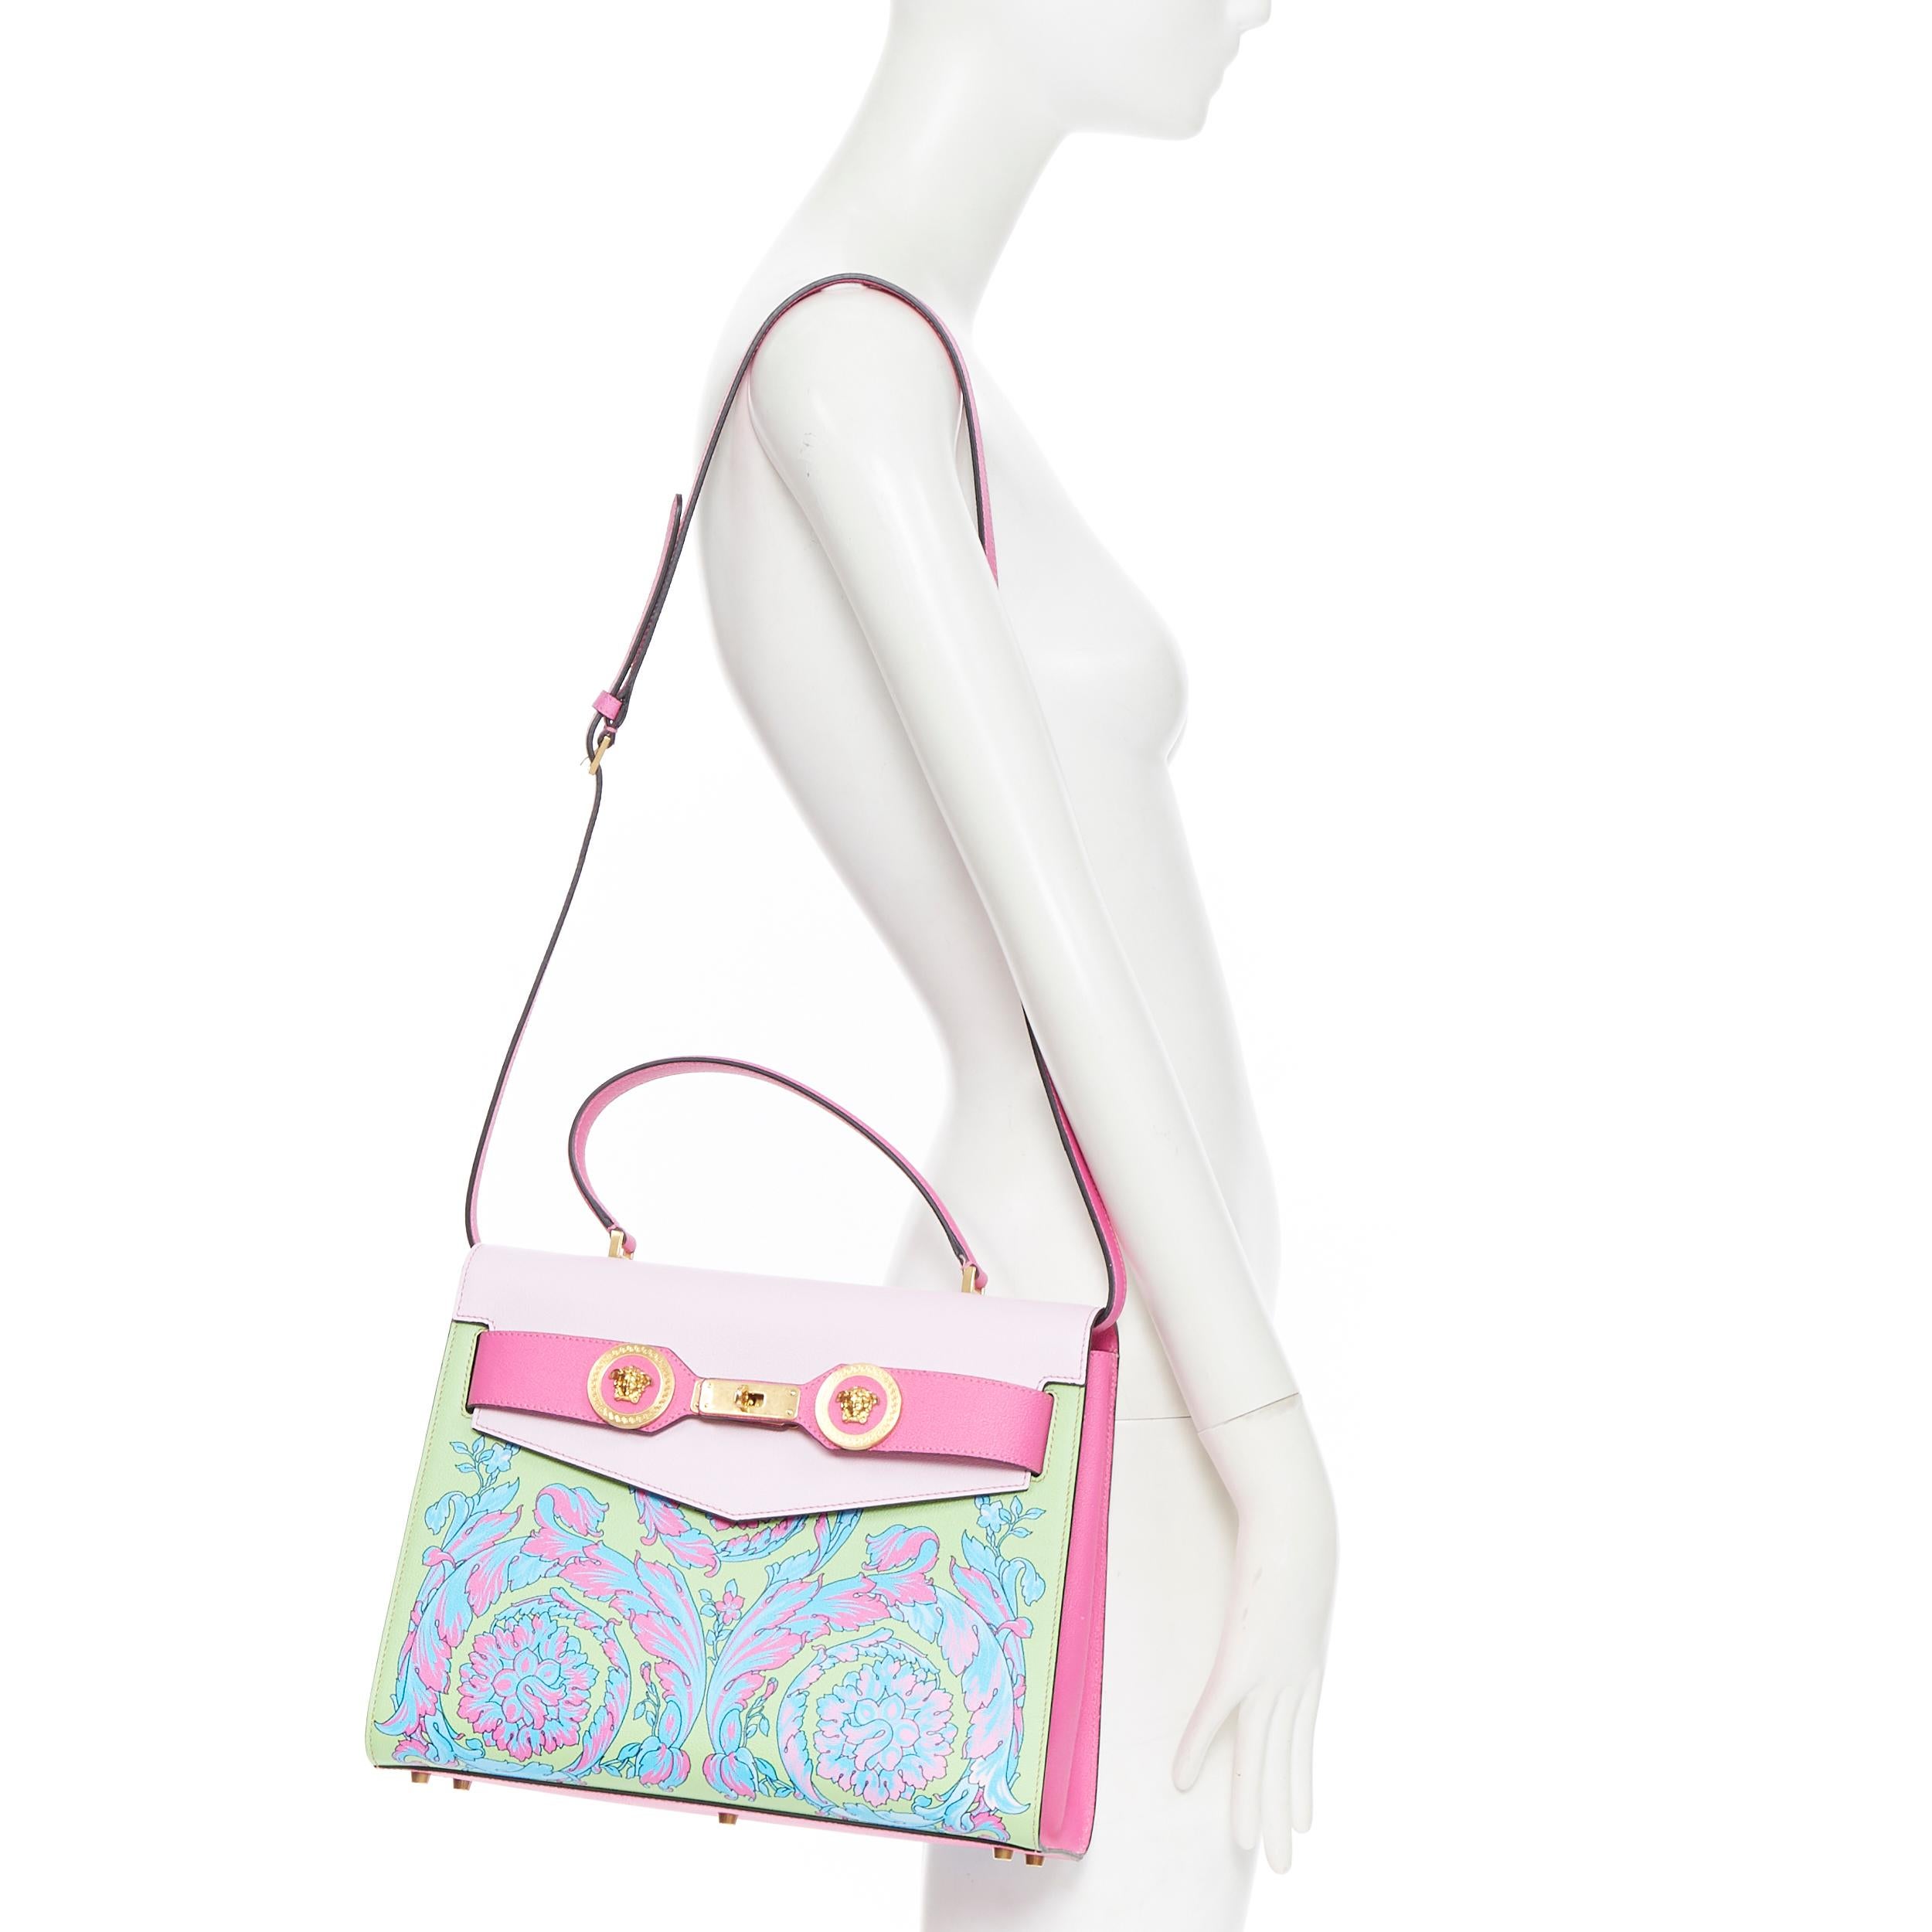 new VERSACE Technicolor Baroque Diana Tribute print top handle Kelly satchel bag
Brand: Versace
Designer: Donatella Versace
Collection: 2019
Model Name / Style: Tribute Diana
Material: Leather
Color: Pink
Pattern: Floral
Closure: Turnlock
Lining